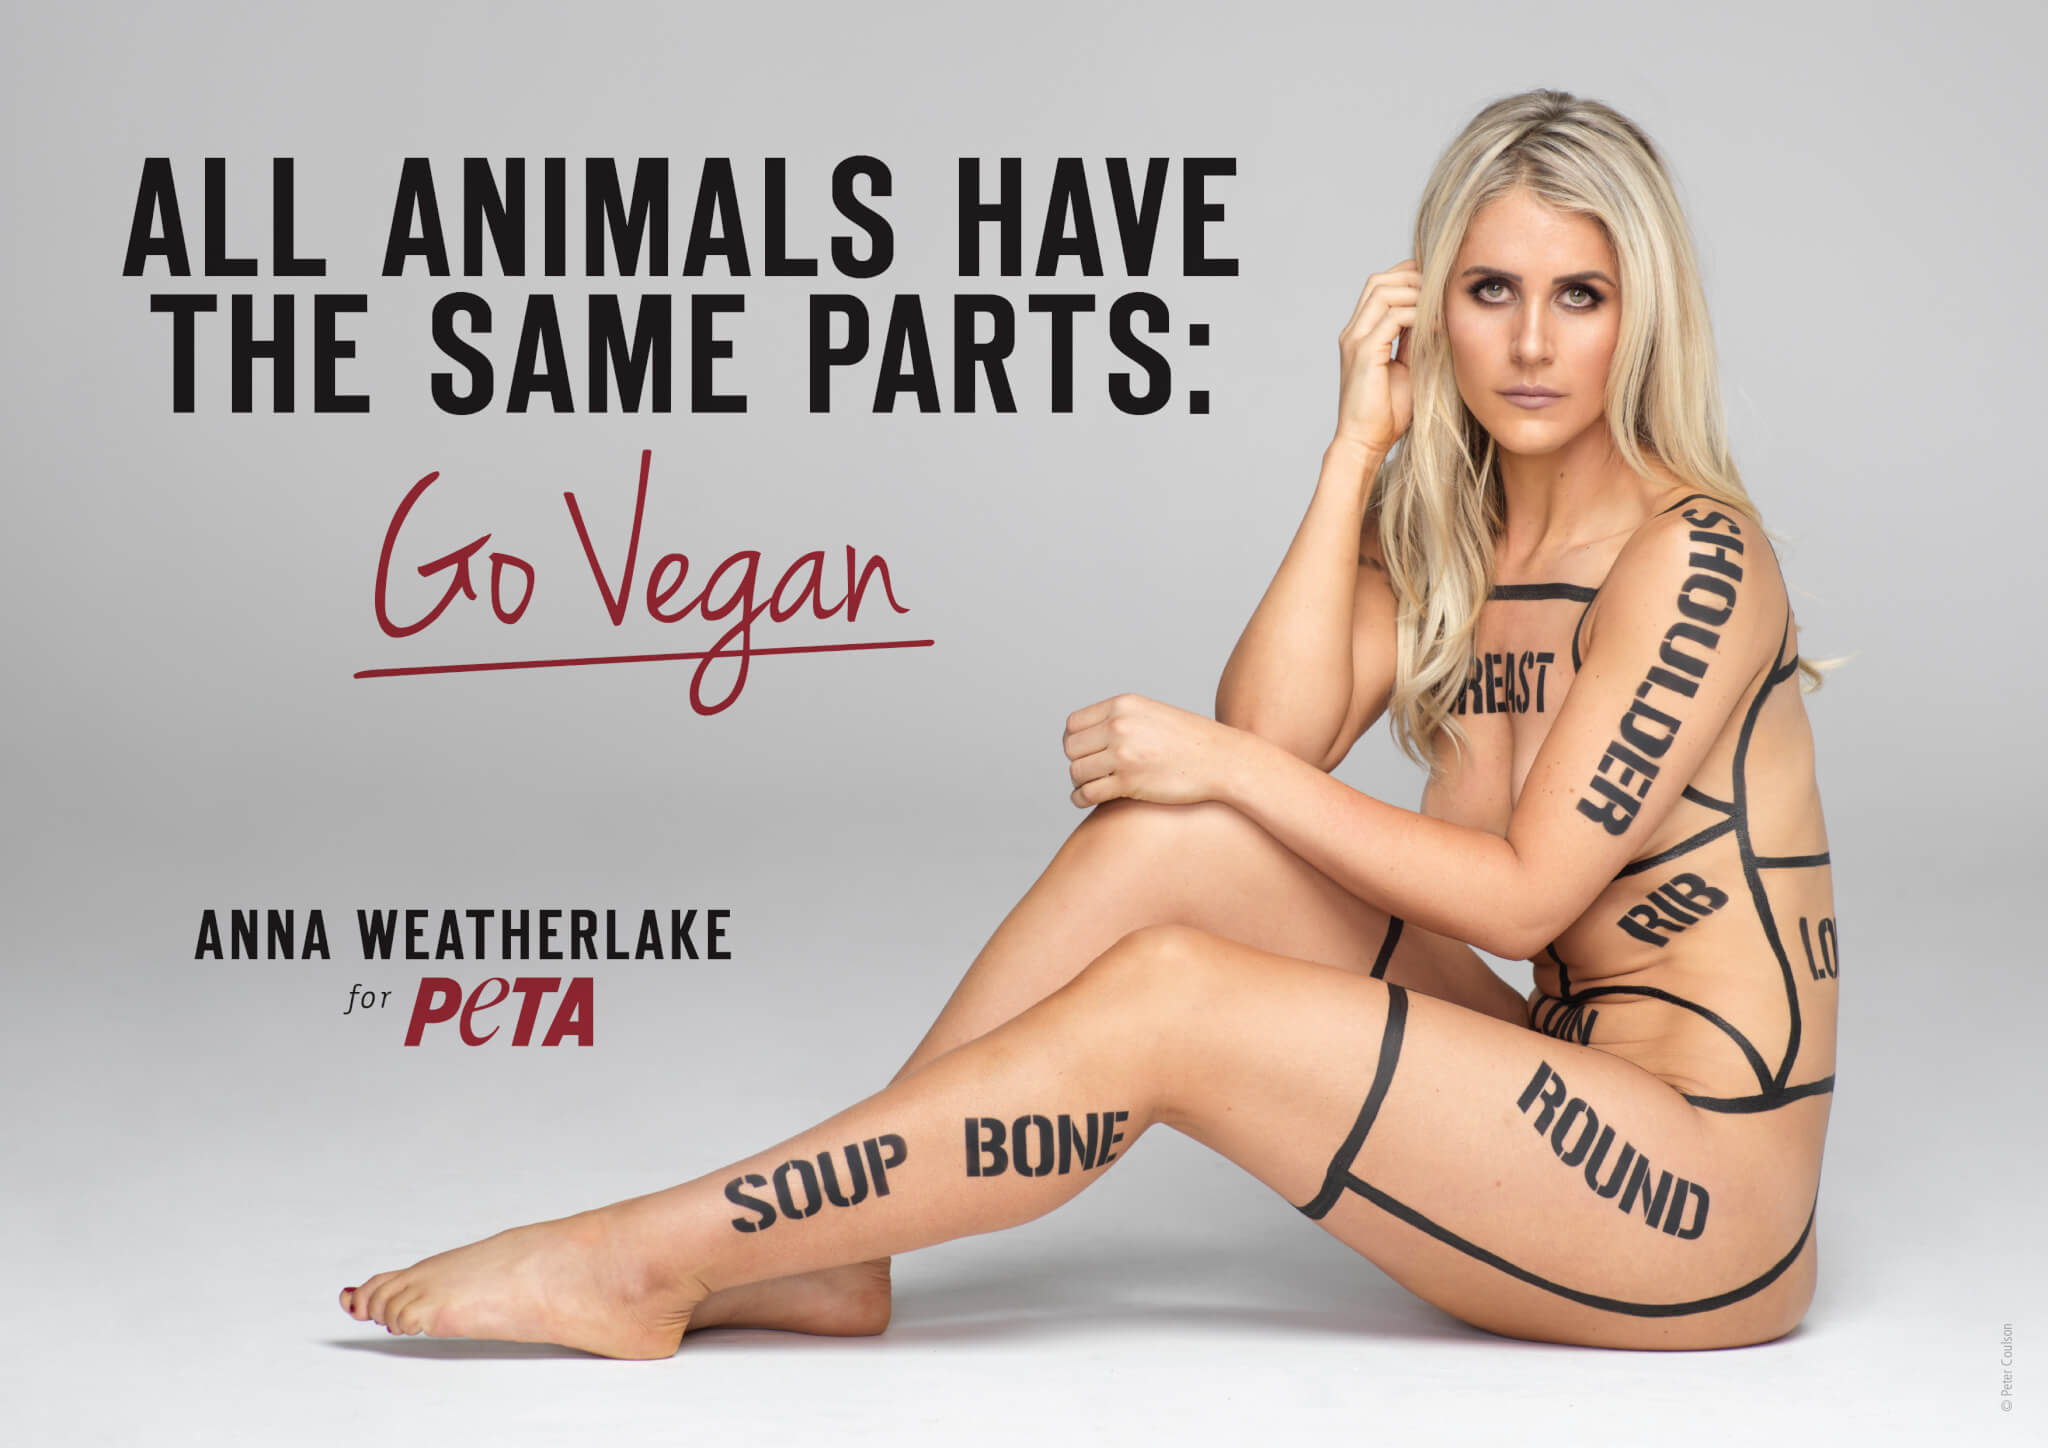 VIDEO: Anna Weatherlake Says, ‘All Animals Have the Same Parts’